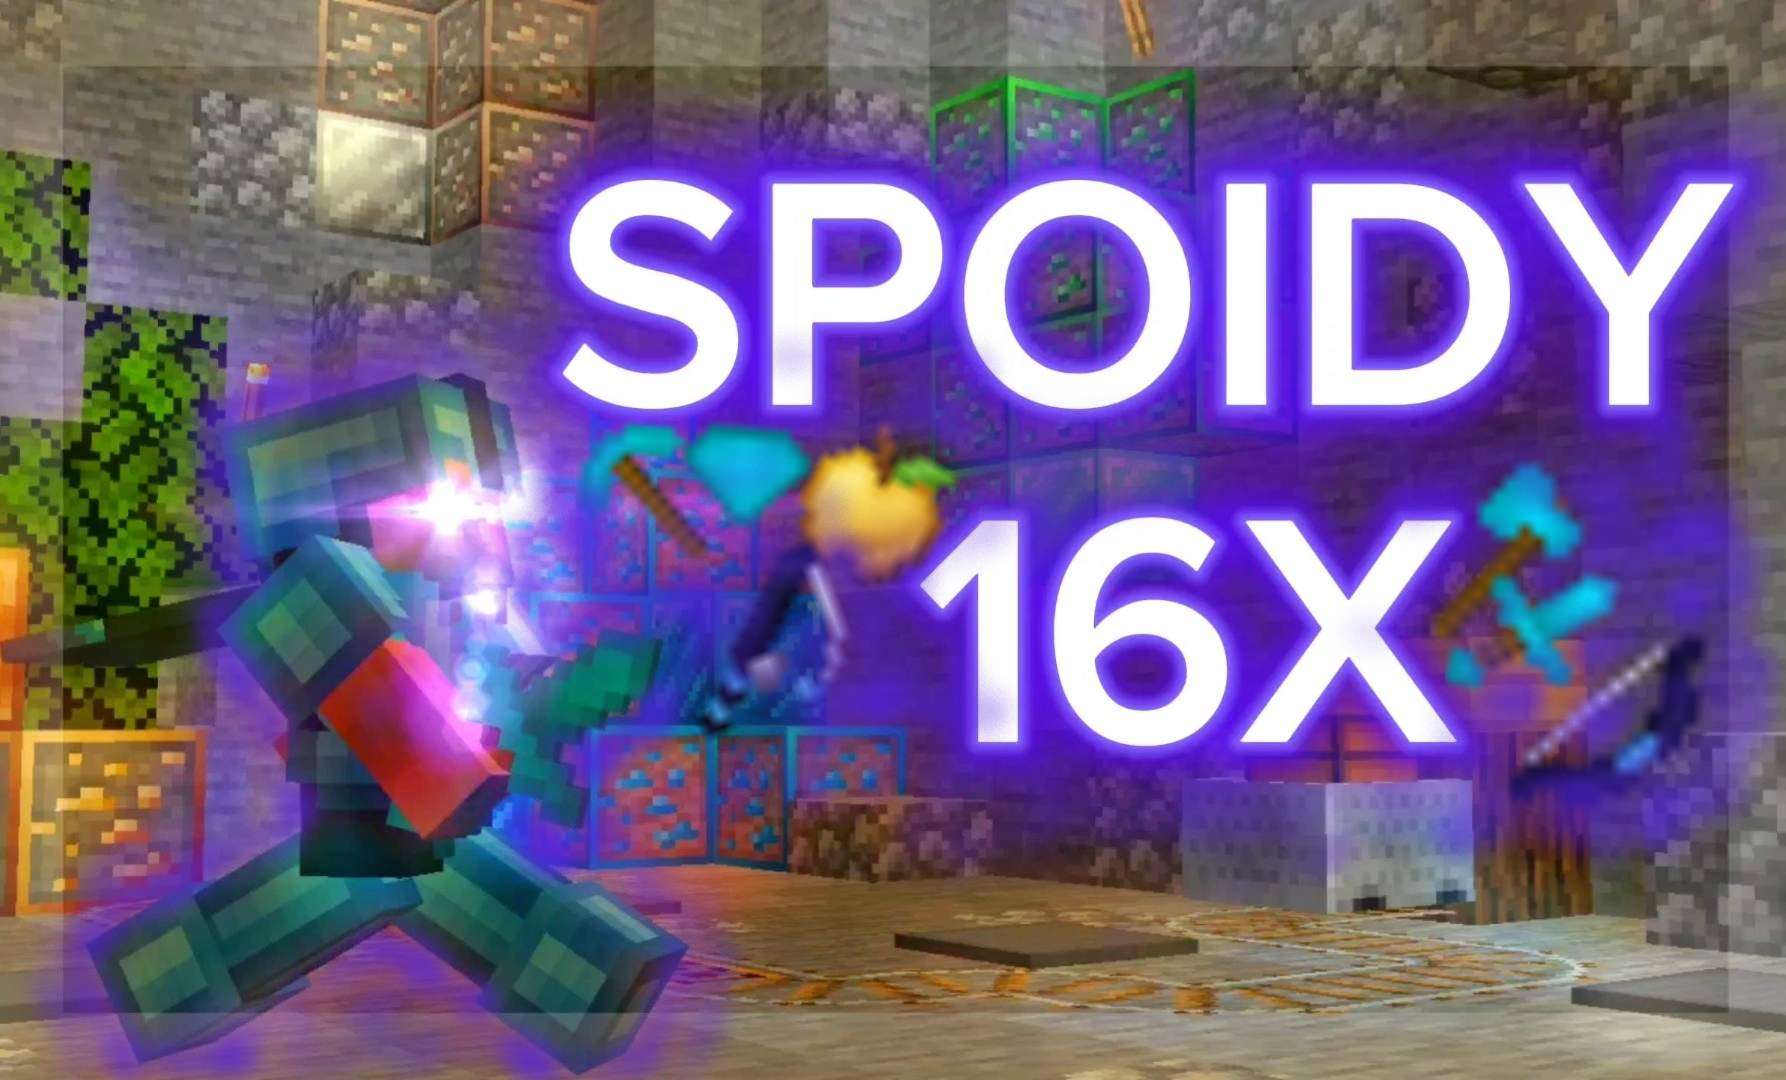 Spoidy  16x by Spoidyyy on PvPRP